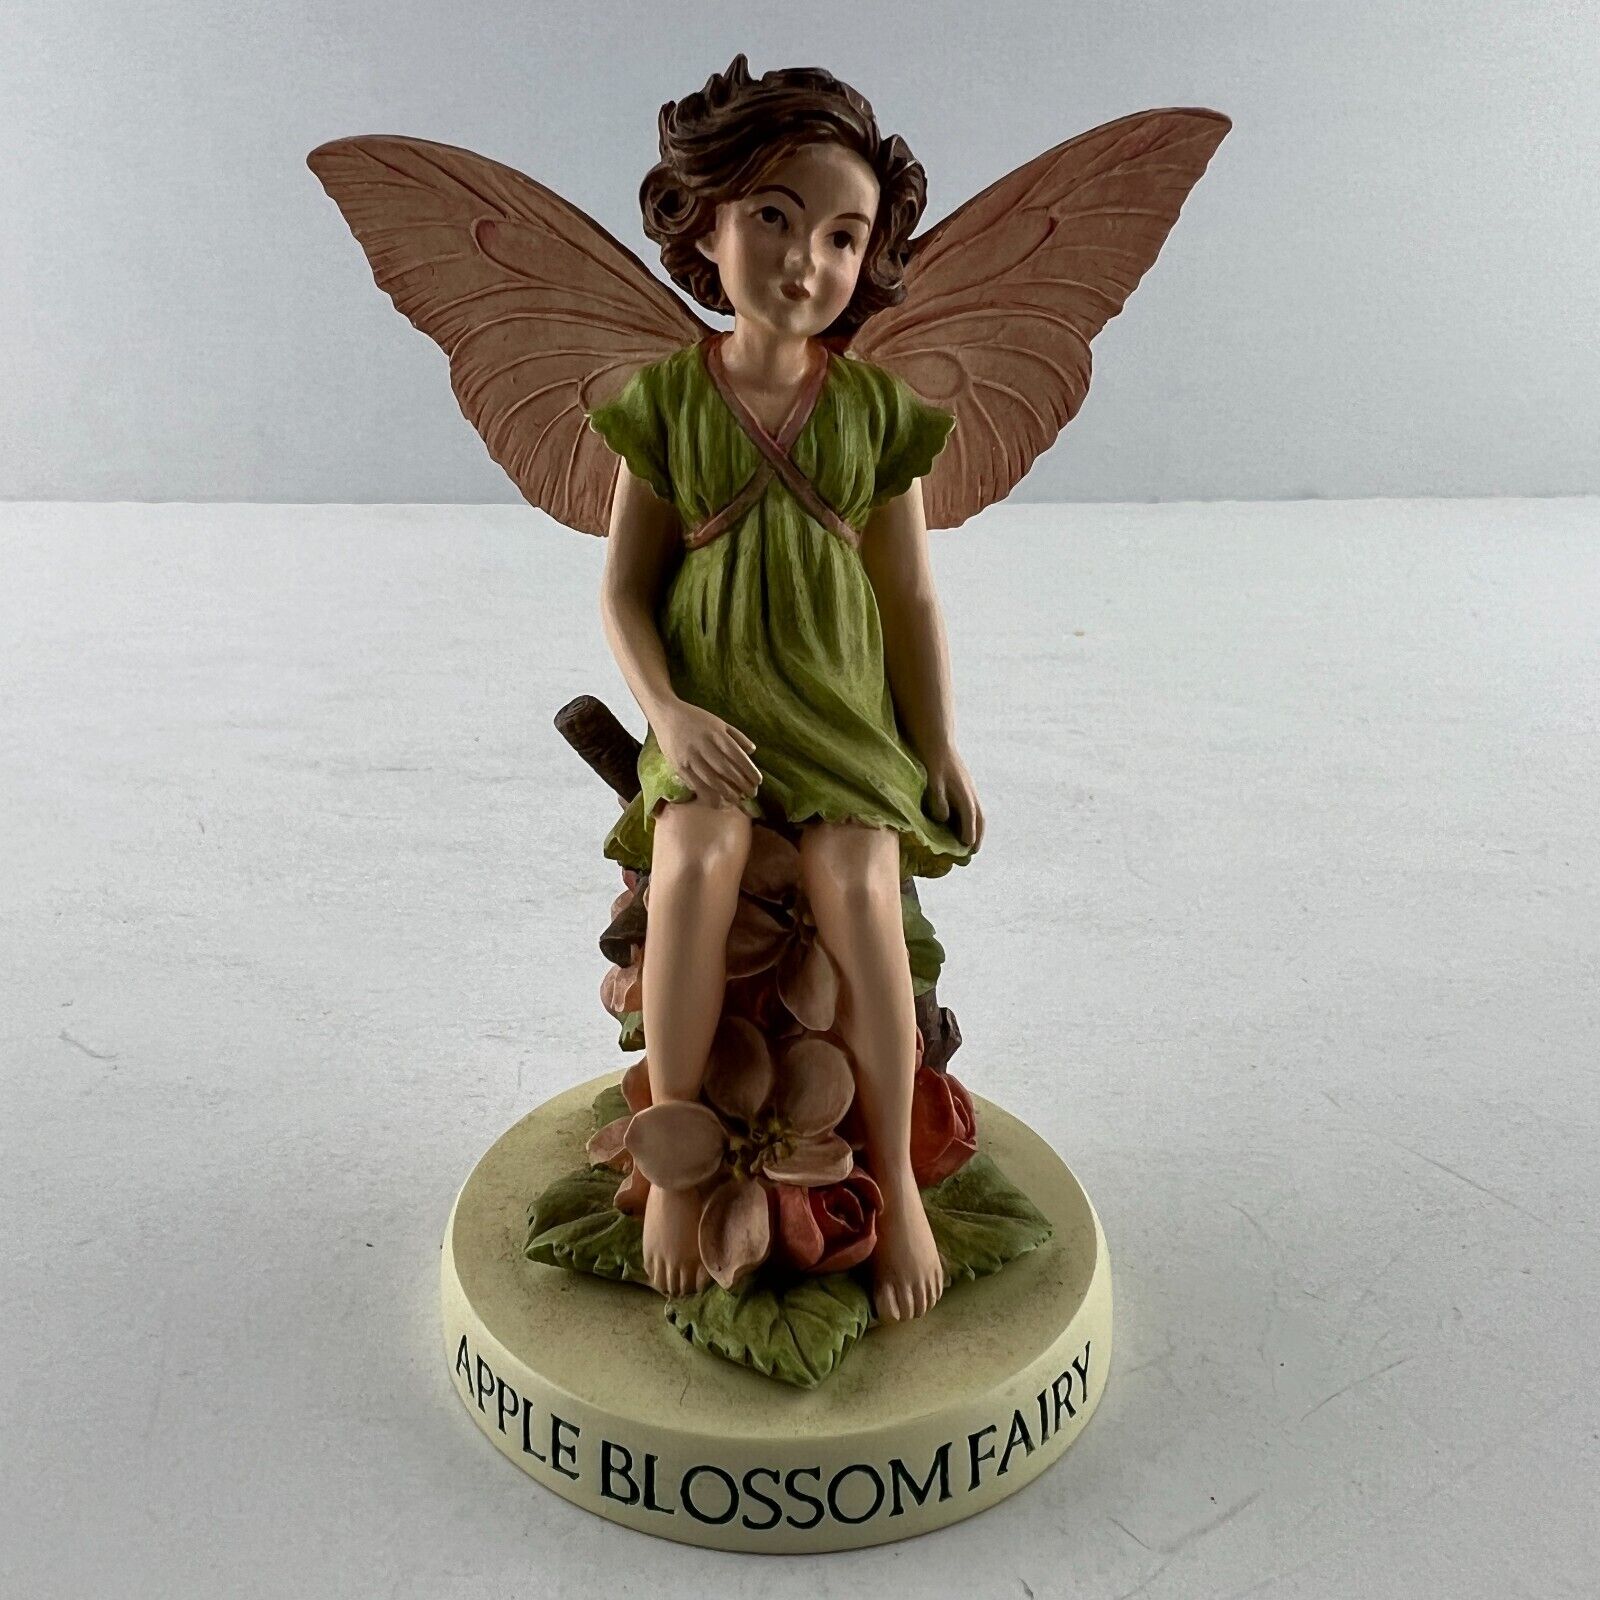 Apple Blossom Flower Fairy Figurine by Cicely Mary Barker RETIRED